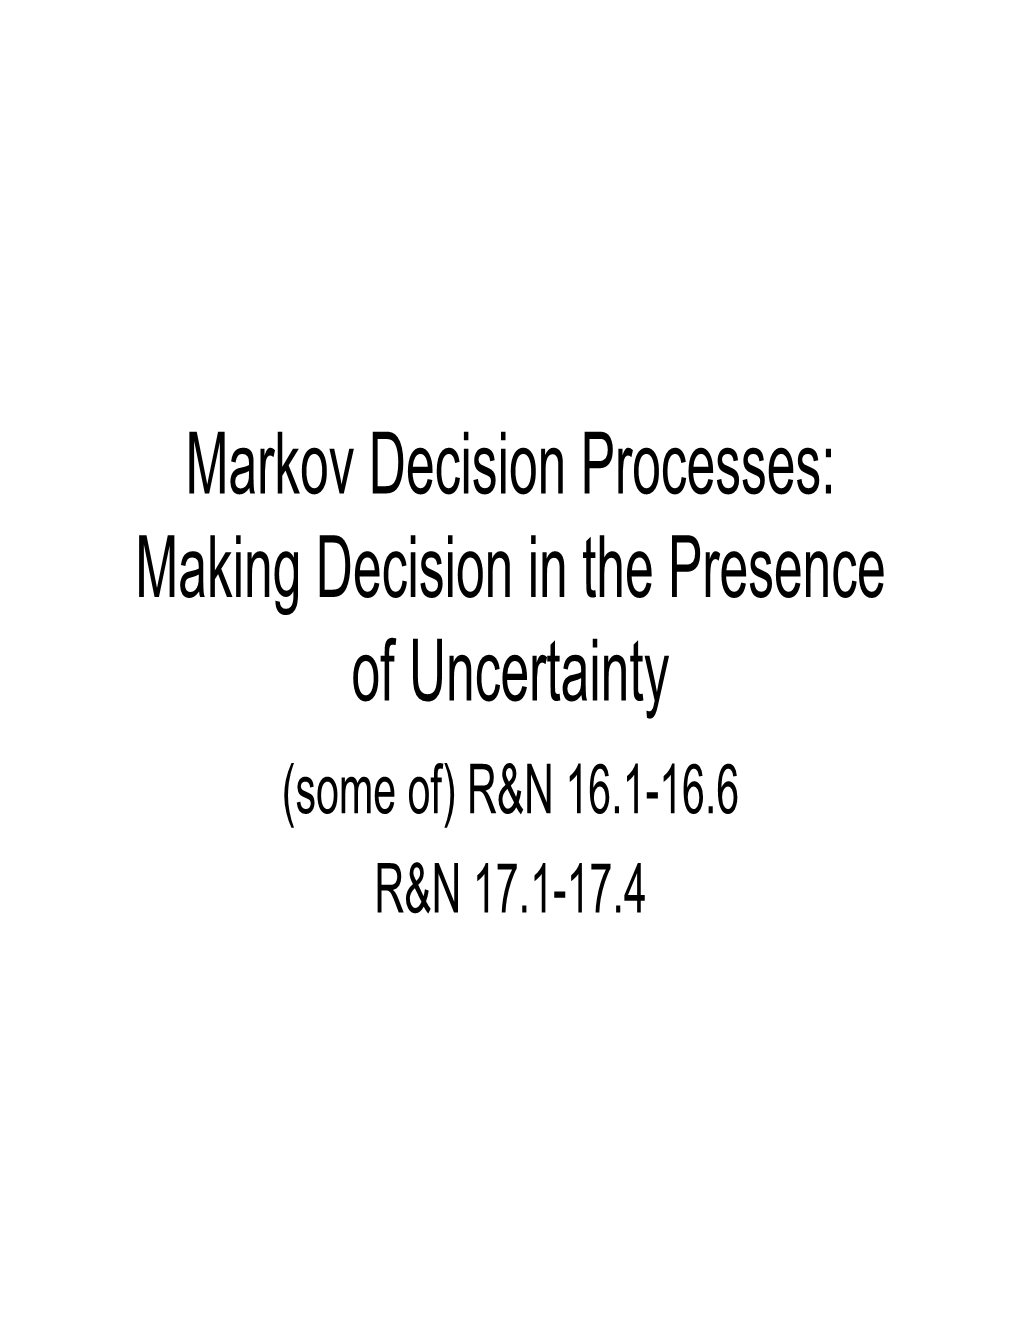 Markov Decision Processes: Making Decision in the Presence of Uncertainty (Some Of) R&N 16.1-16.6 R&N 17.1-17.4 Different Aspects of “Machine Learning”